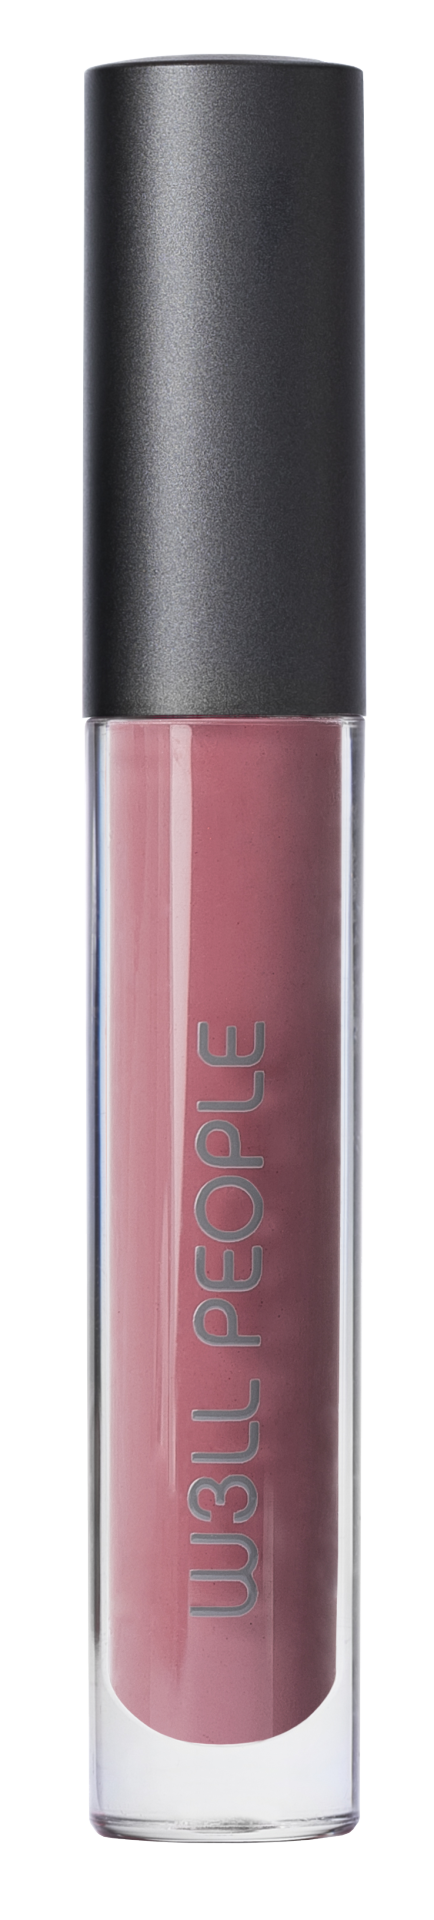 slide 1 of 1, W3LL PEOPLE Bio Extreme Lipgloss, Nude Rose, 1.1 fl oz